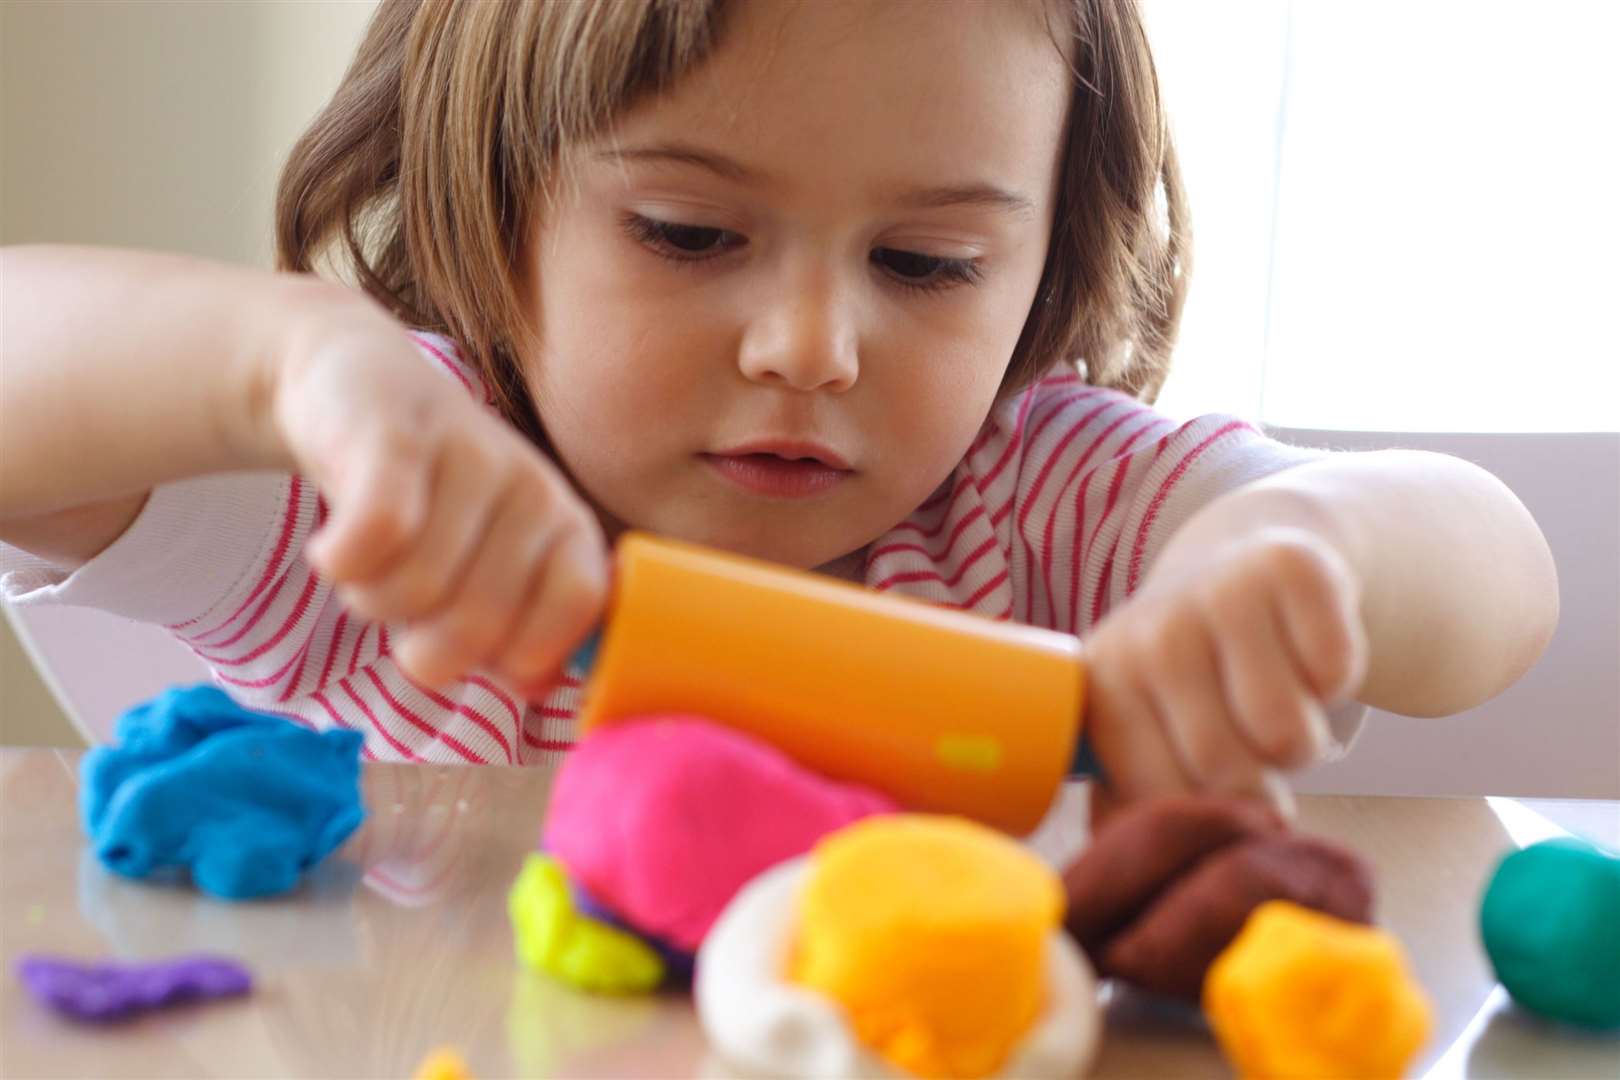 Creative play at home is important for child development. Picture: iStock/PA